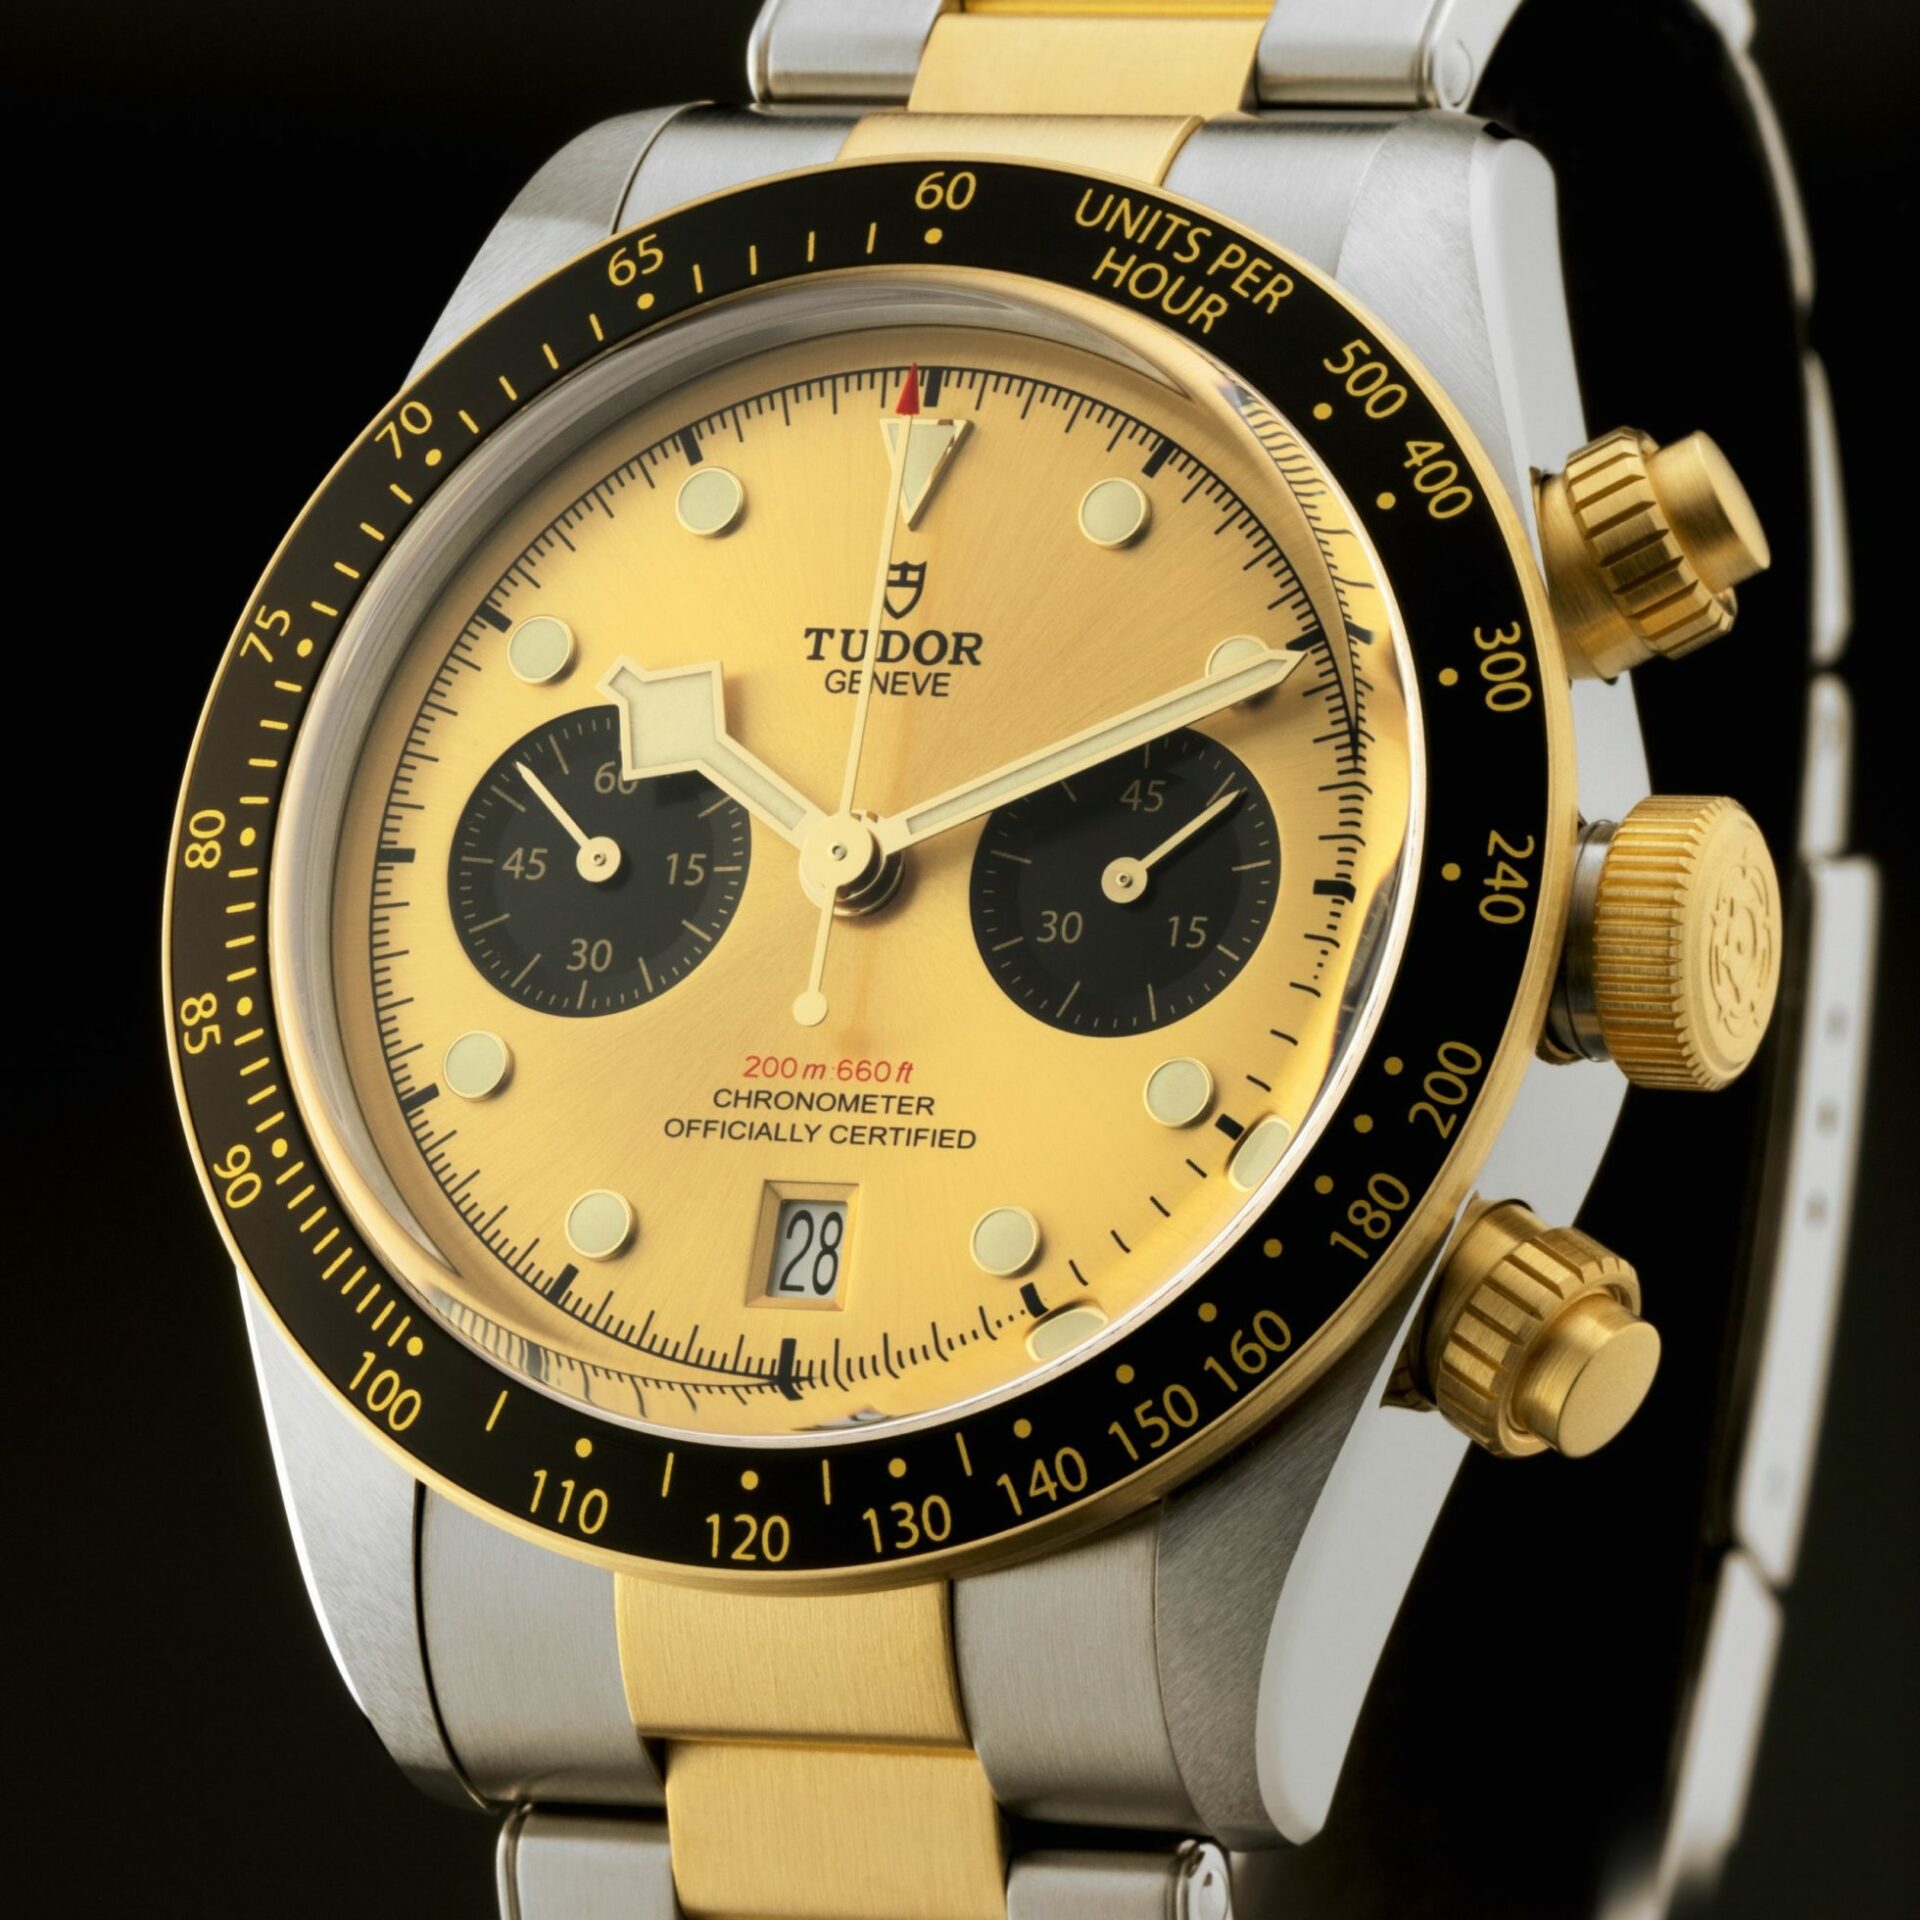 Tudor collection overview